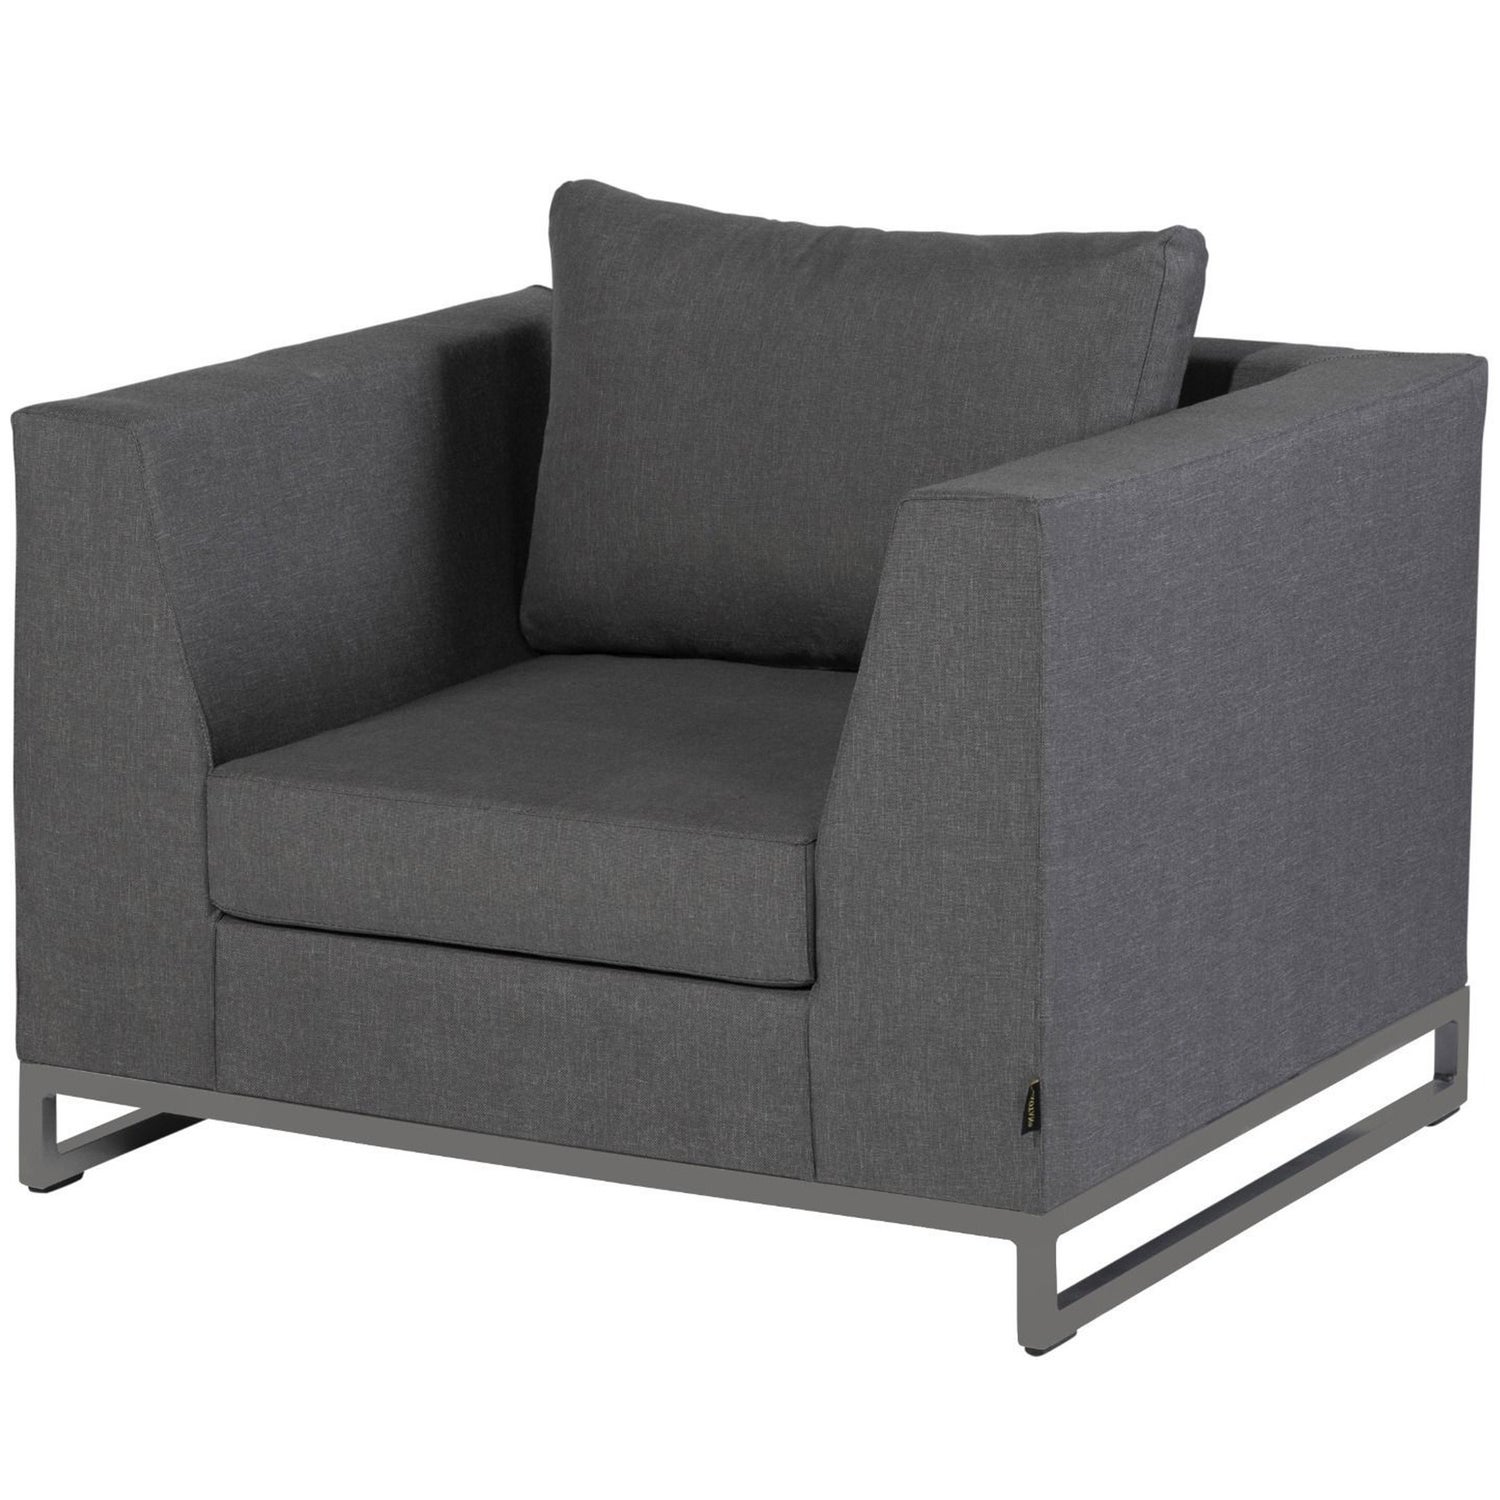 CH1224CSGA-01_VS_EXT_Rhodos_fauteuil_stone_grey_SA.jpg?auto=webp&format=png&width=1500&height=1500